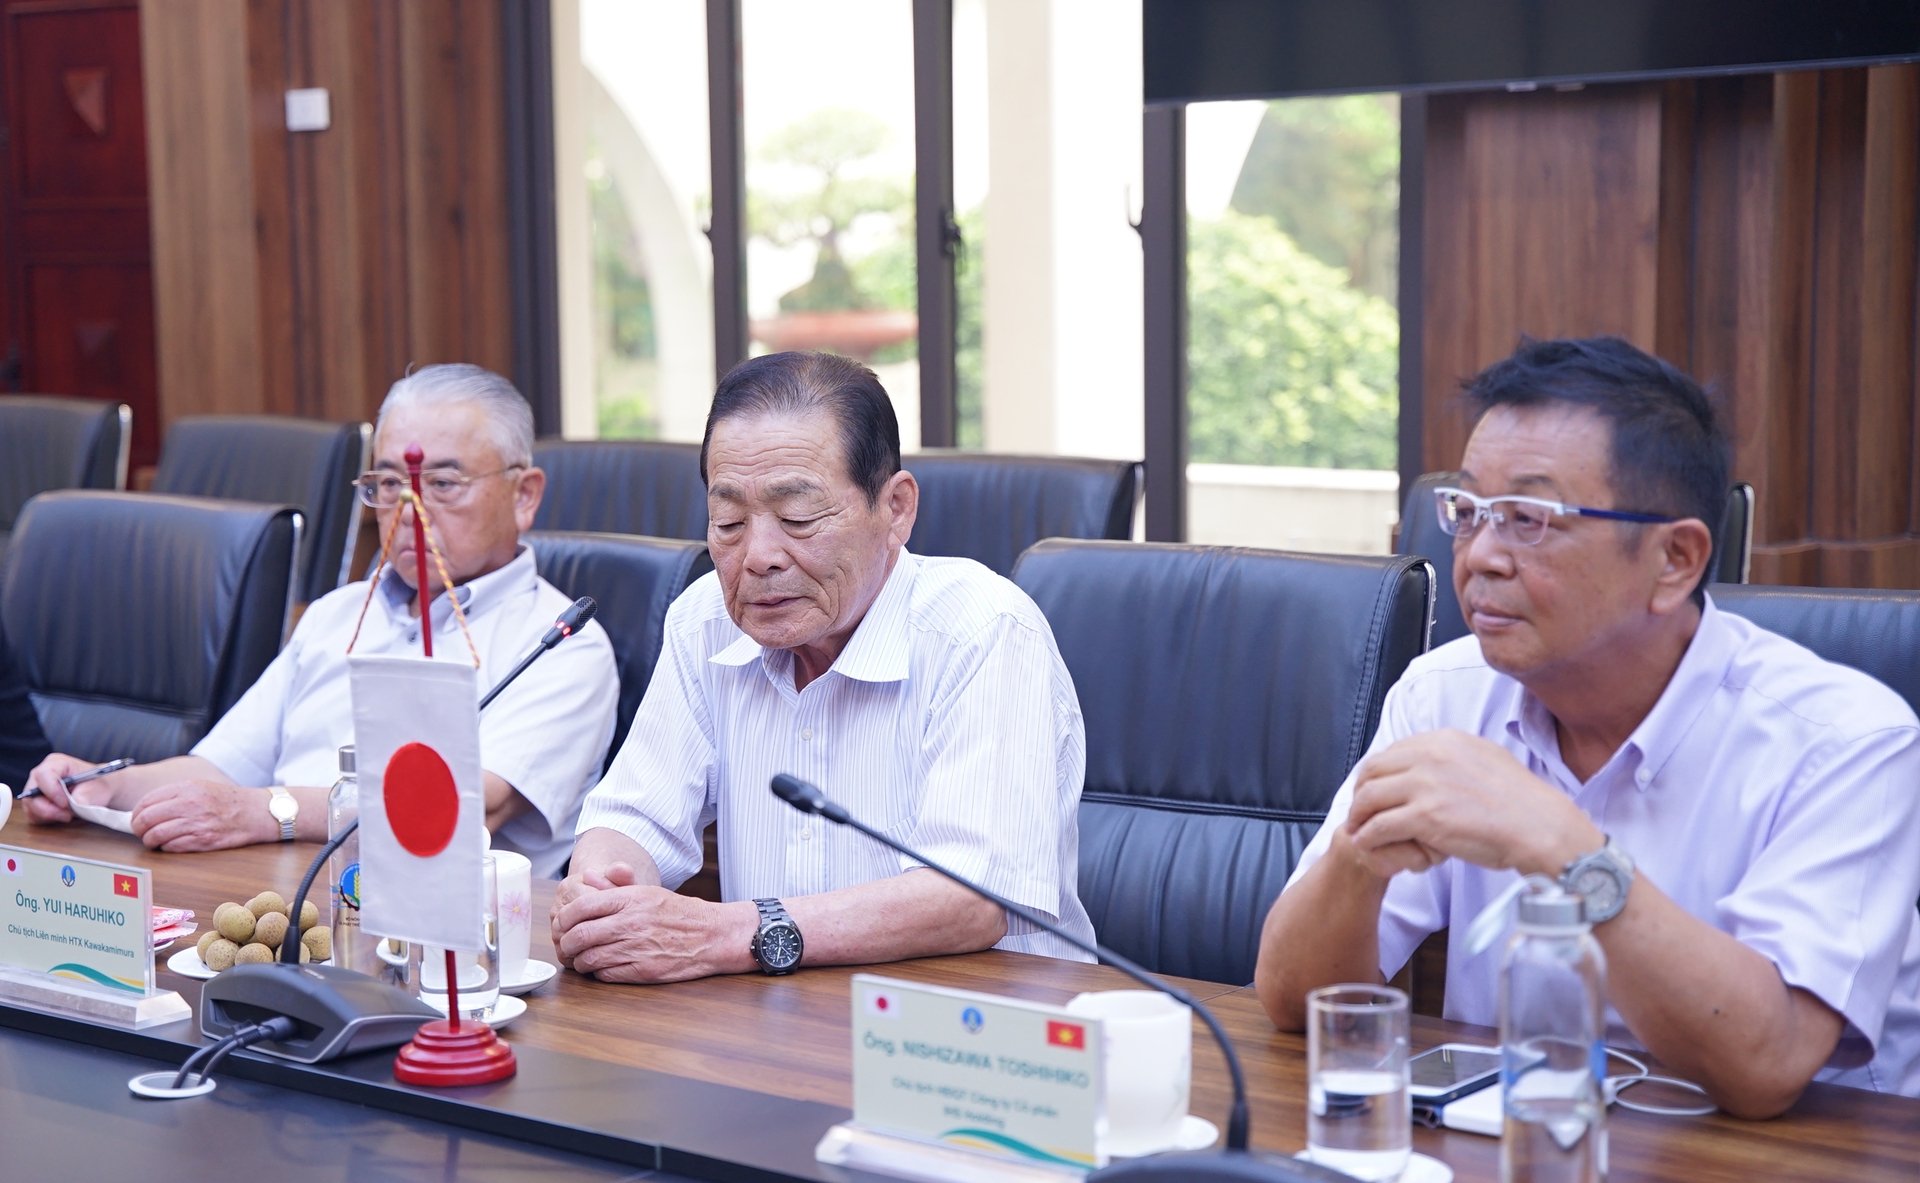 Mr. Yui Haruhiko, Chairman of Kawakamimura Cooperative Alliance (middle) expressed his wish to welcome Vietnamese agricultural extension officers to Japan to work. Photo: Linh Linh.